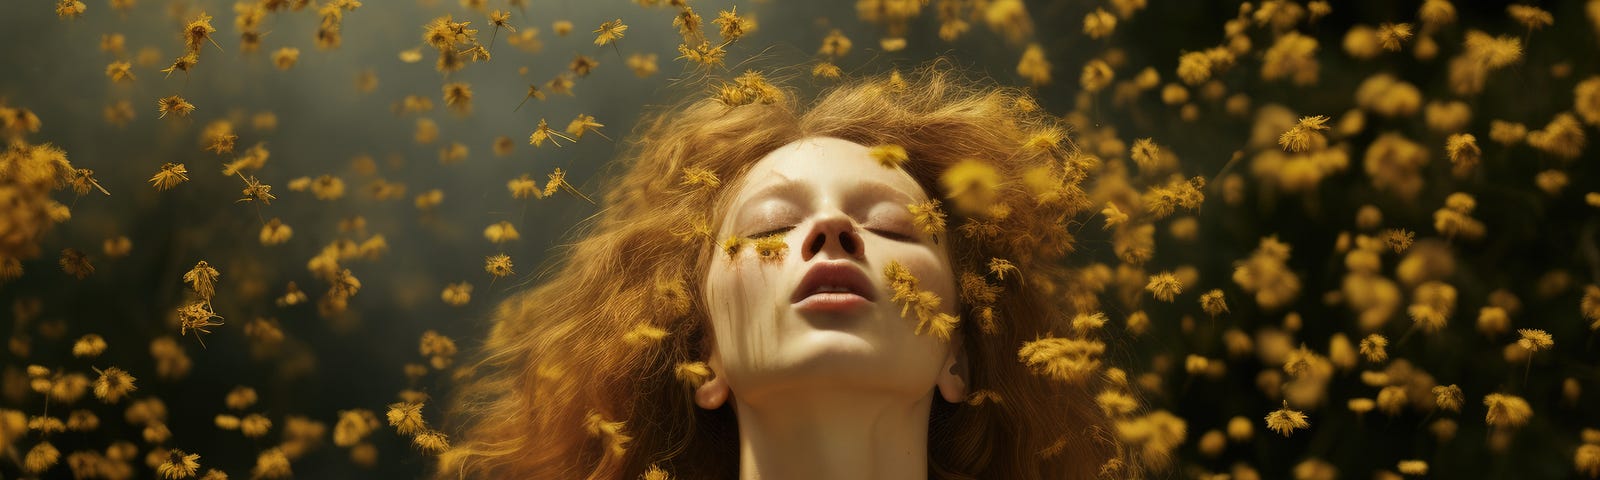 Woman in yellow dress experiencing a pollen burst outdoors